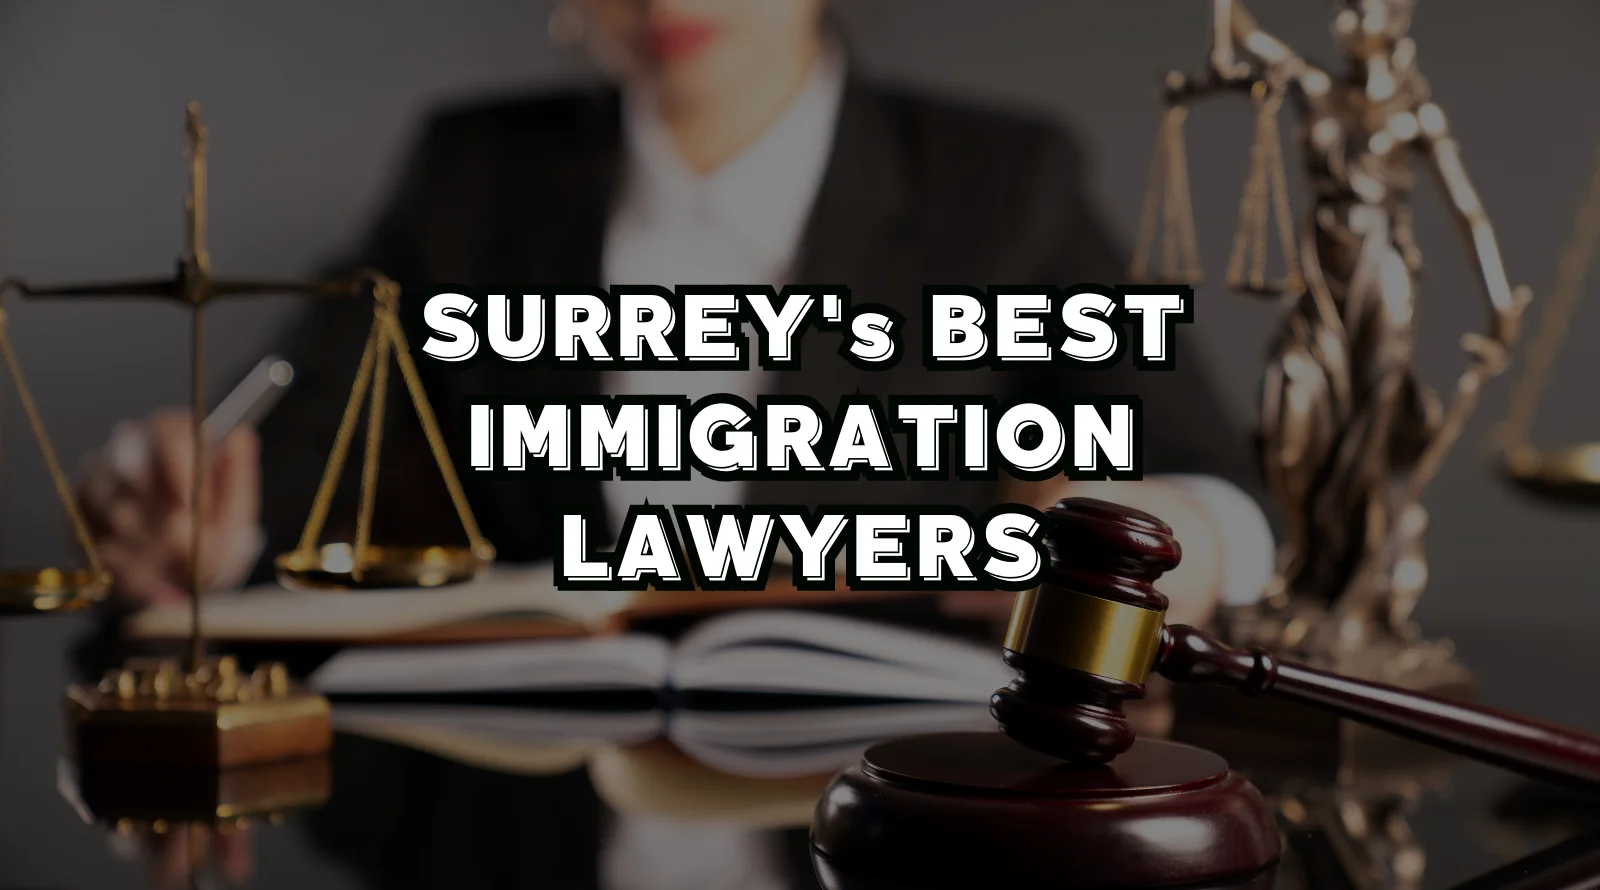 Best Immigration Lawyers in Surrey, BC